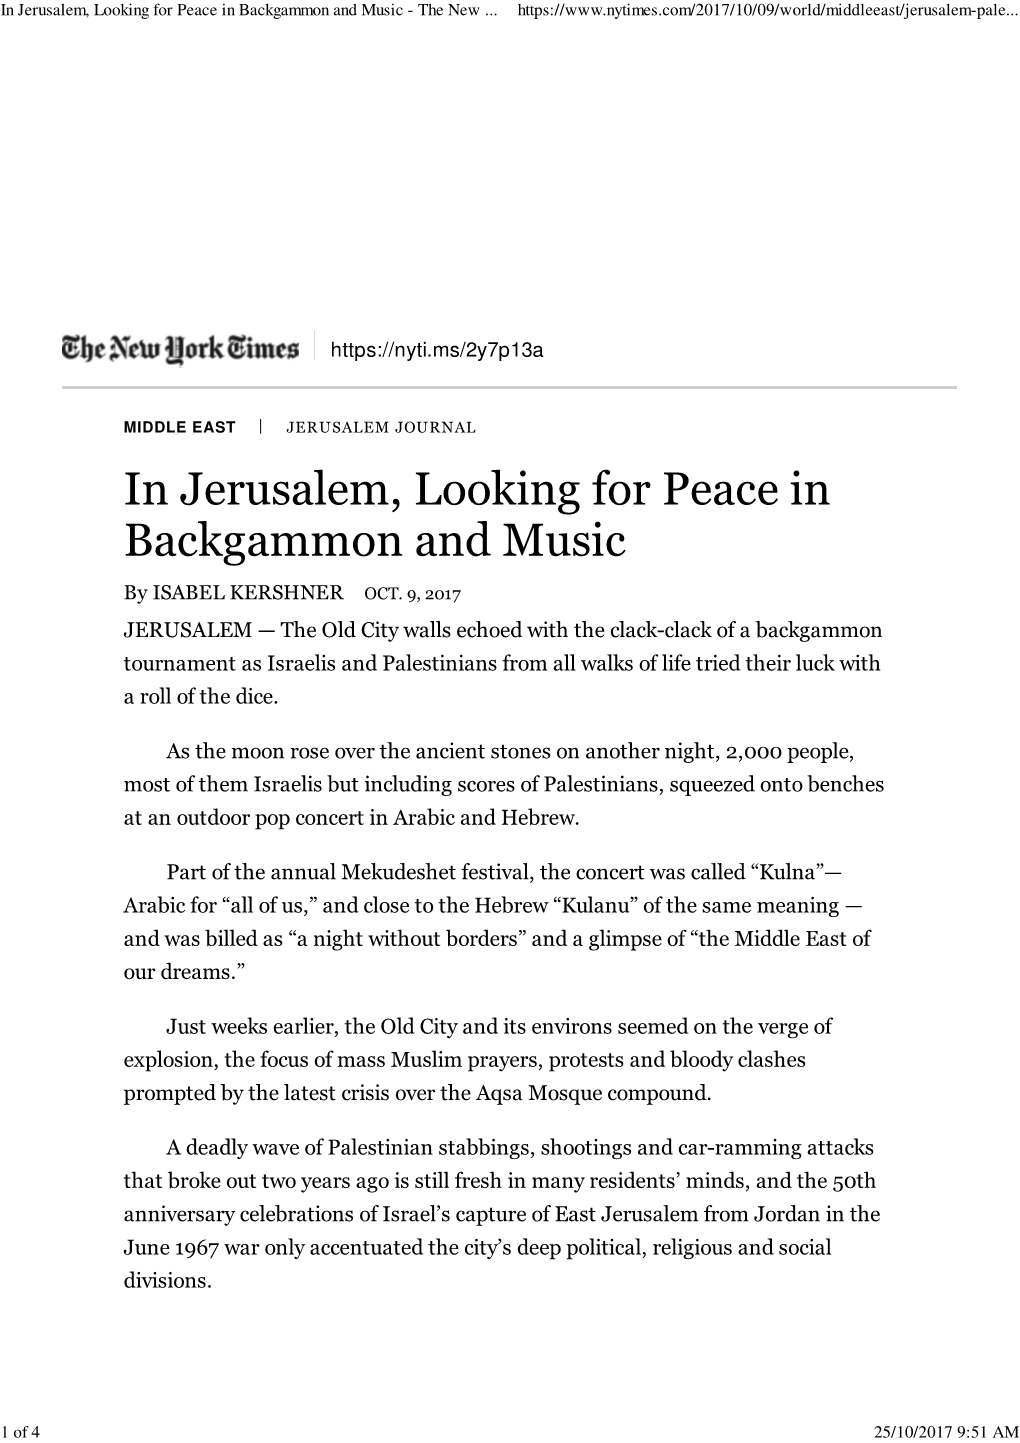 In Jerusalem, Looking for Peace in Backgammon and Music - the New